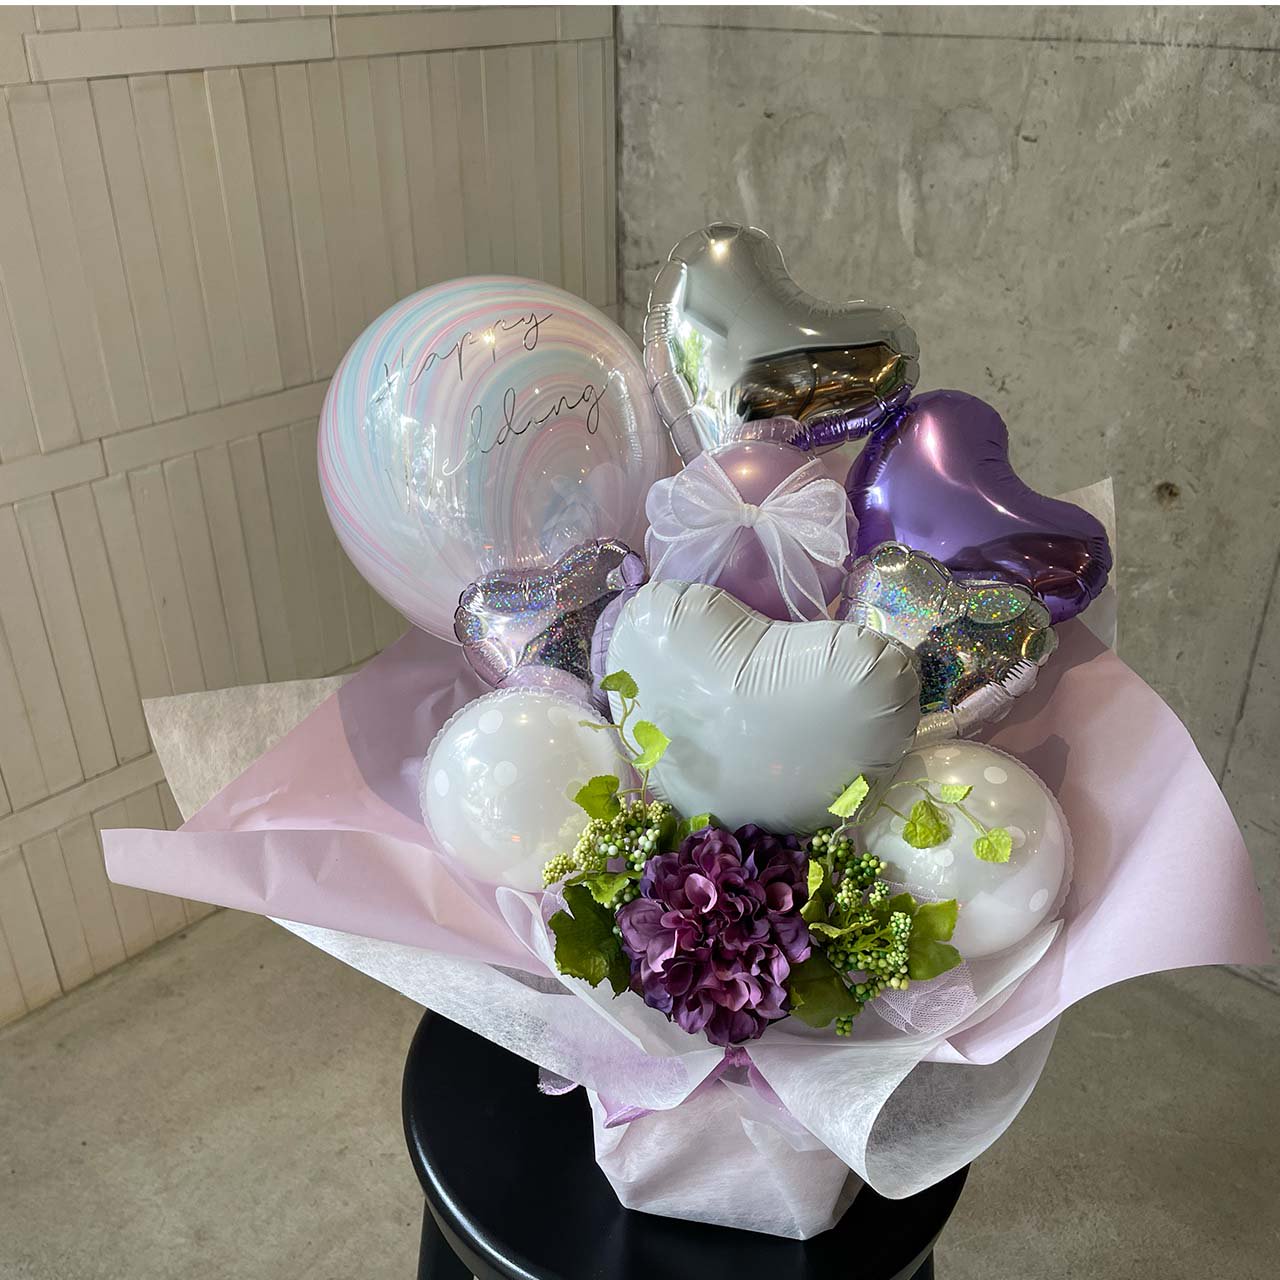 Rennes Marble Balloon Gift - Table top type - レンヌマーブルバルーンギフト